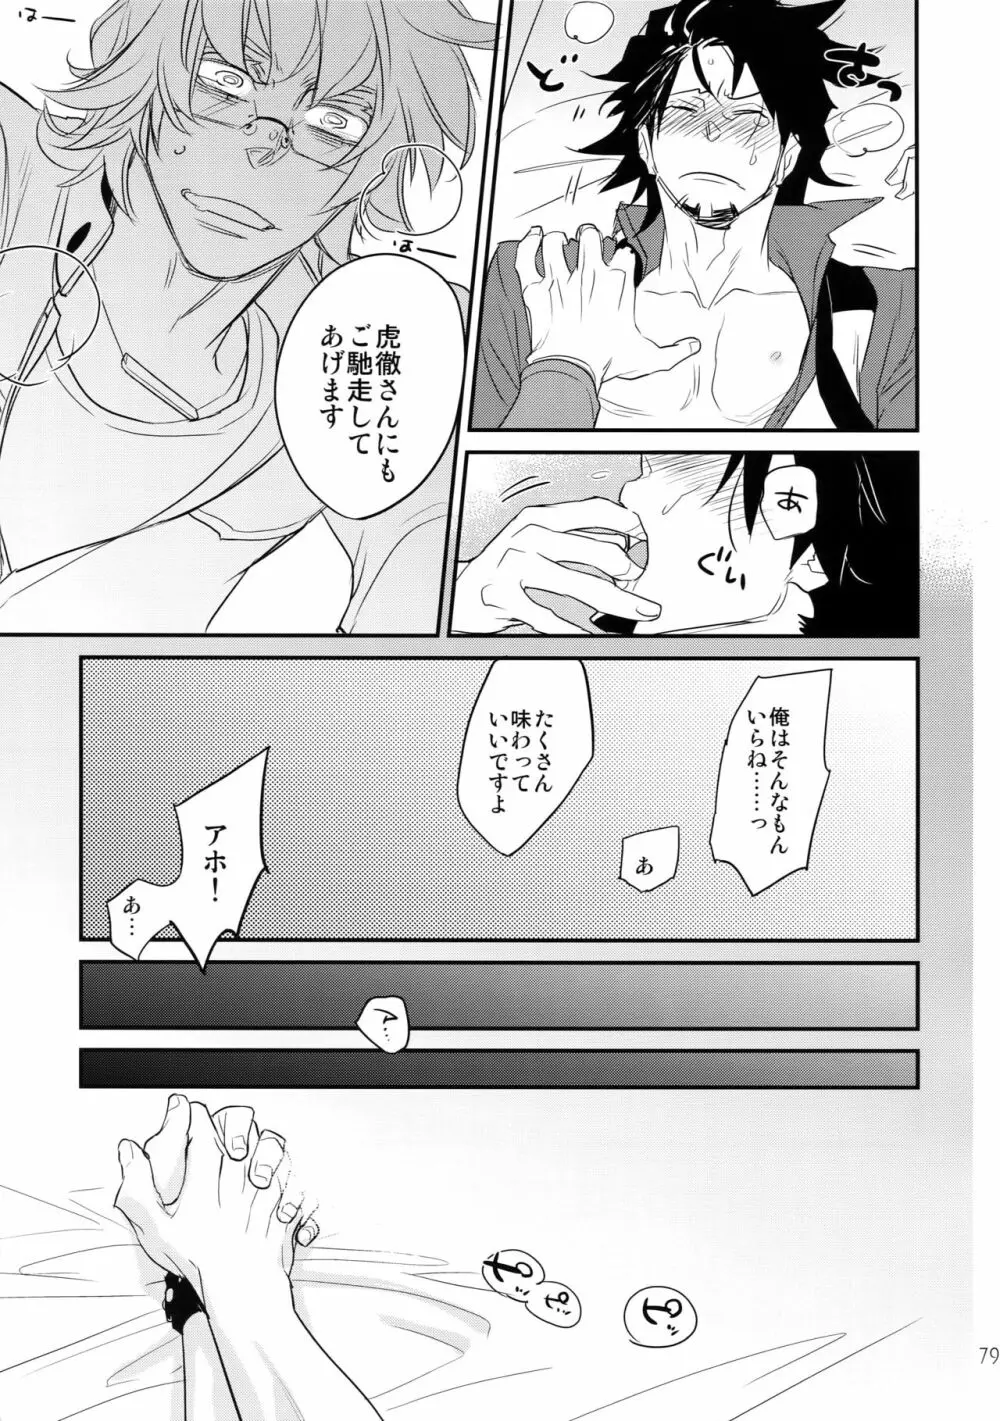 T&B再録!2 - page78